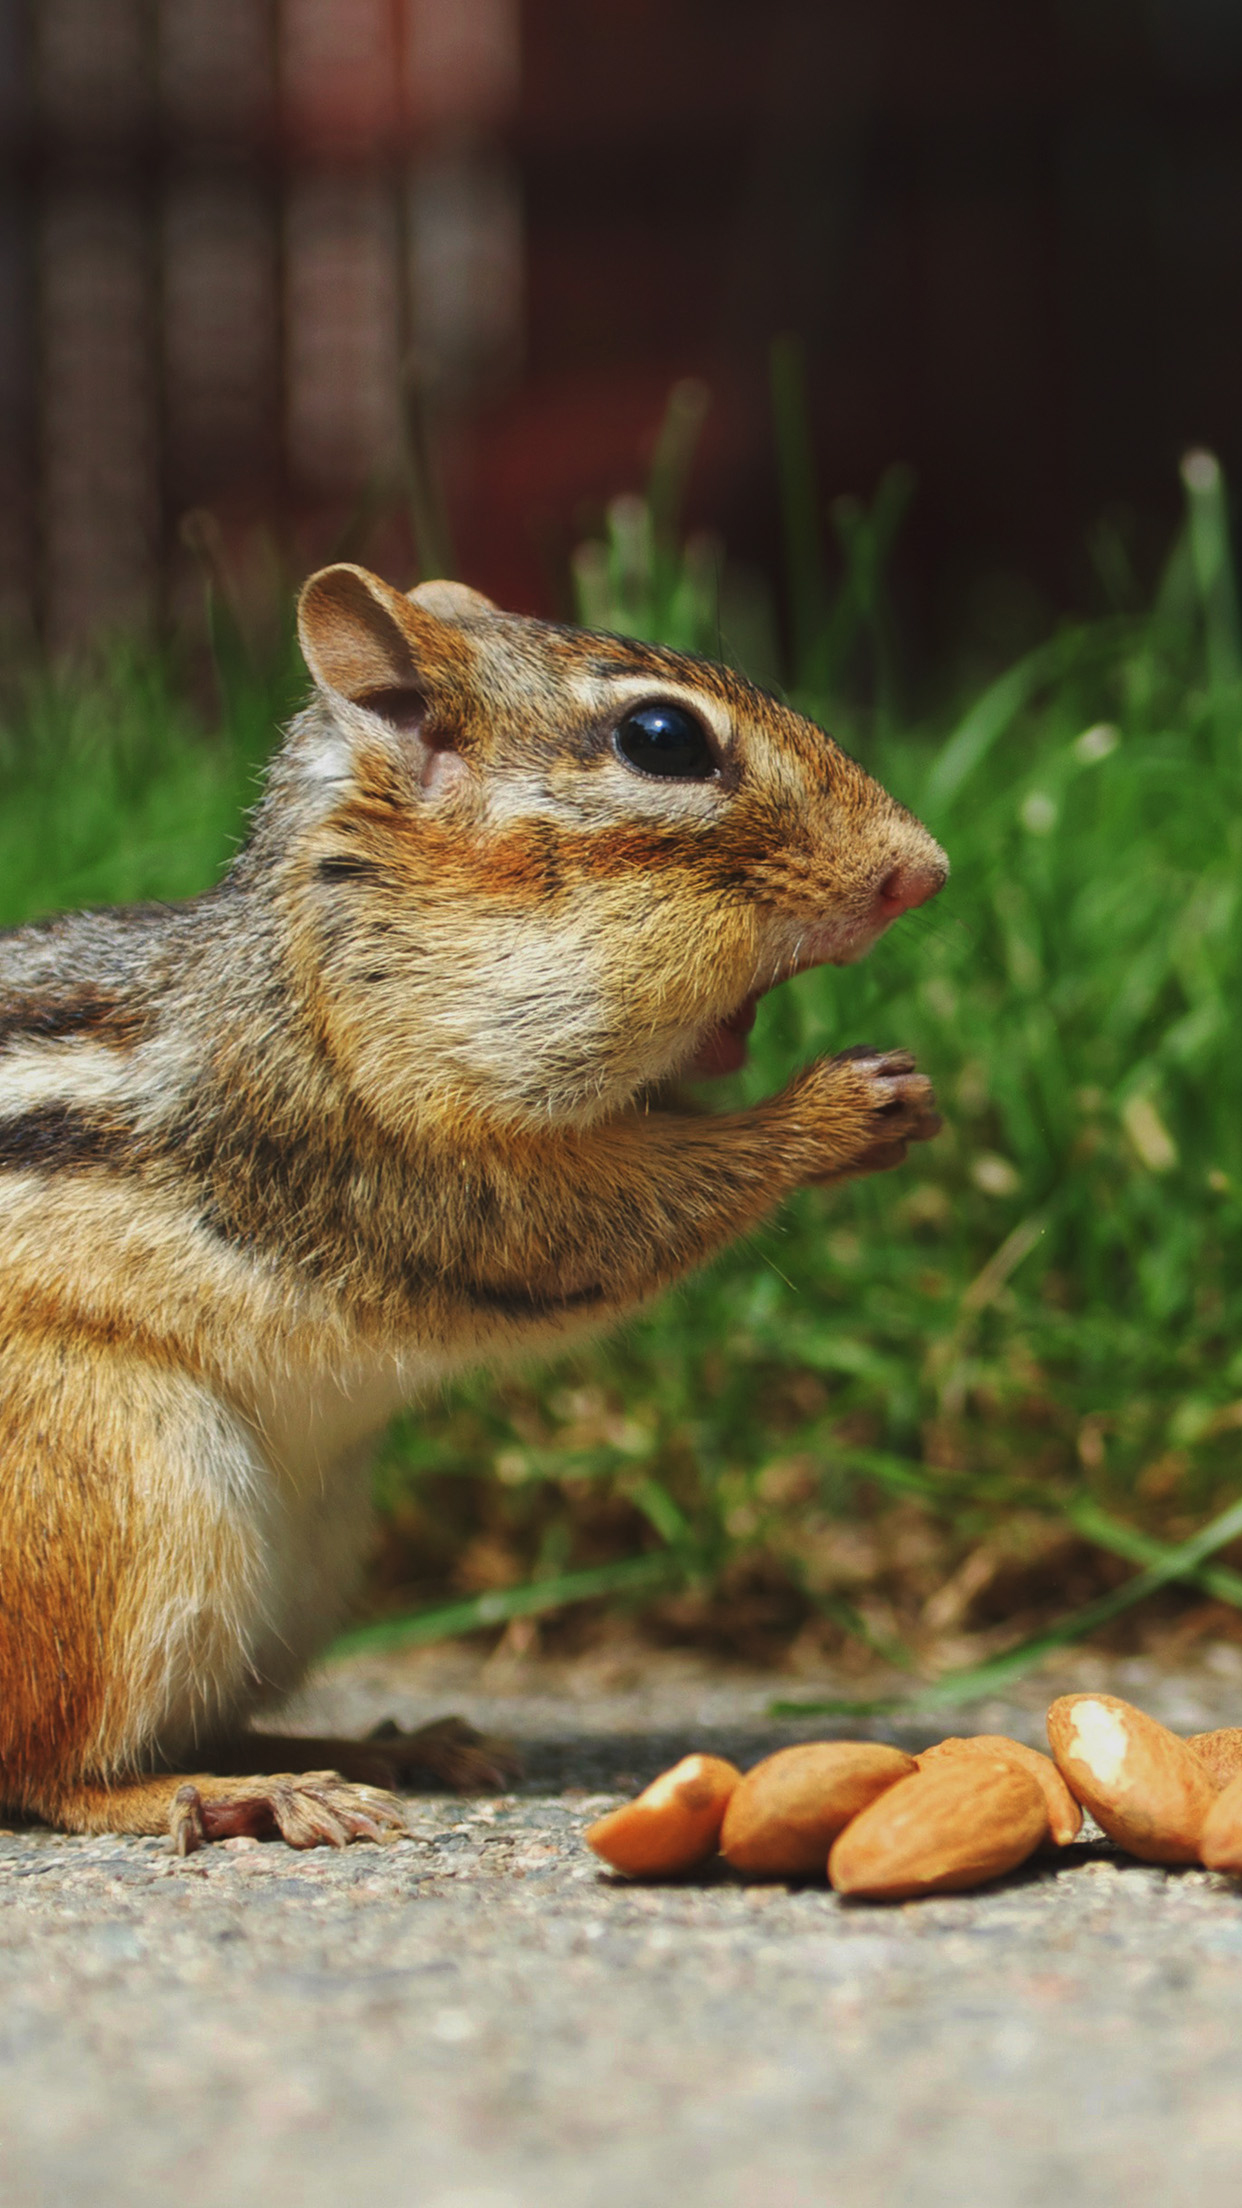 Cute Chipmunk Eating Surprised Android Wallpaper free download